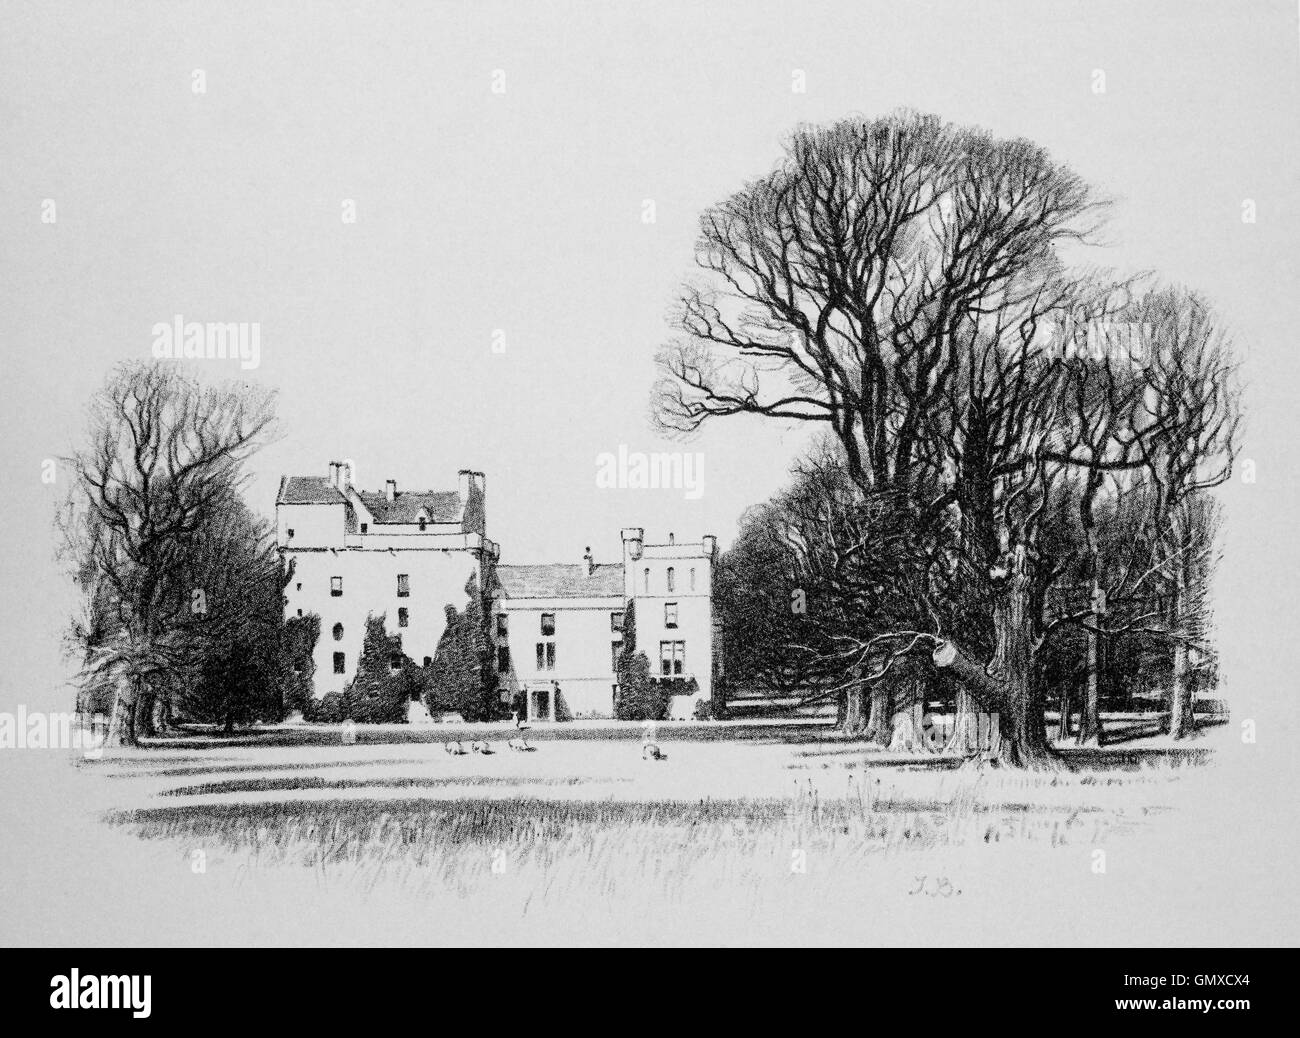 Lennoxlove House includes the 15th-century Lethington Castle,  Near Haddington in East Lothian, Scotland. It is now the seat of the Duke of Hamilton who was involved in the mission to negotiate peace between Britain and Germany by  Rudolf Hess, Adolf Hitler's deputy, who flew to Scotland in 1941. (From 'Sketches in East Lothian' by Thomas B. Blacklock...1892) Stock Photo